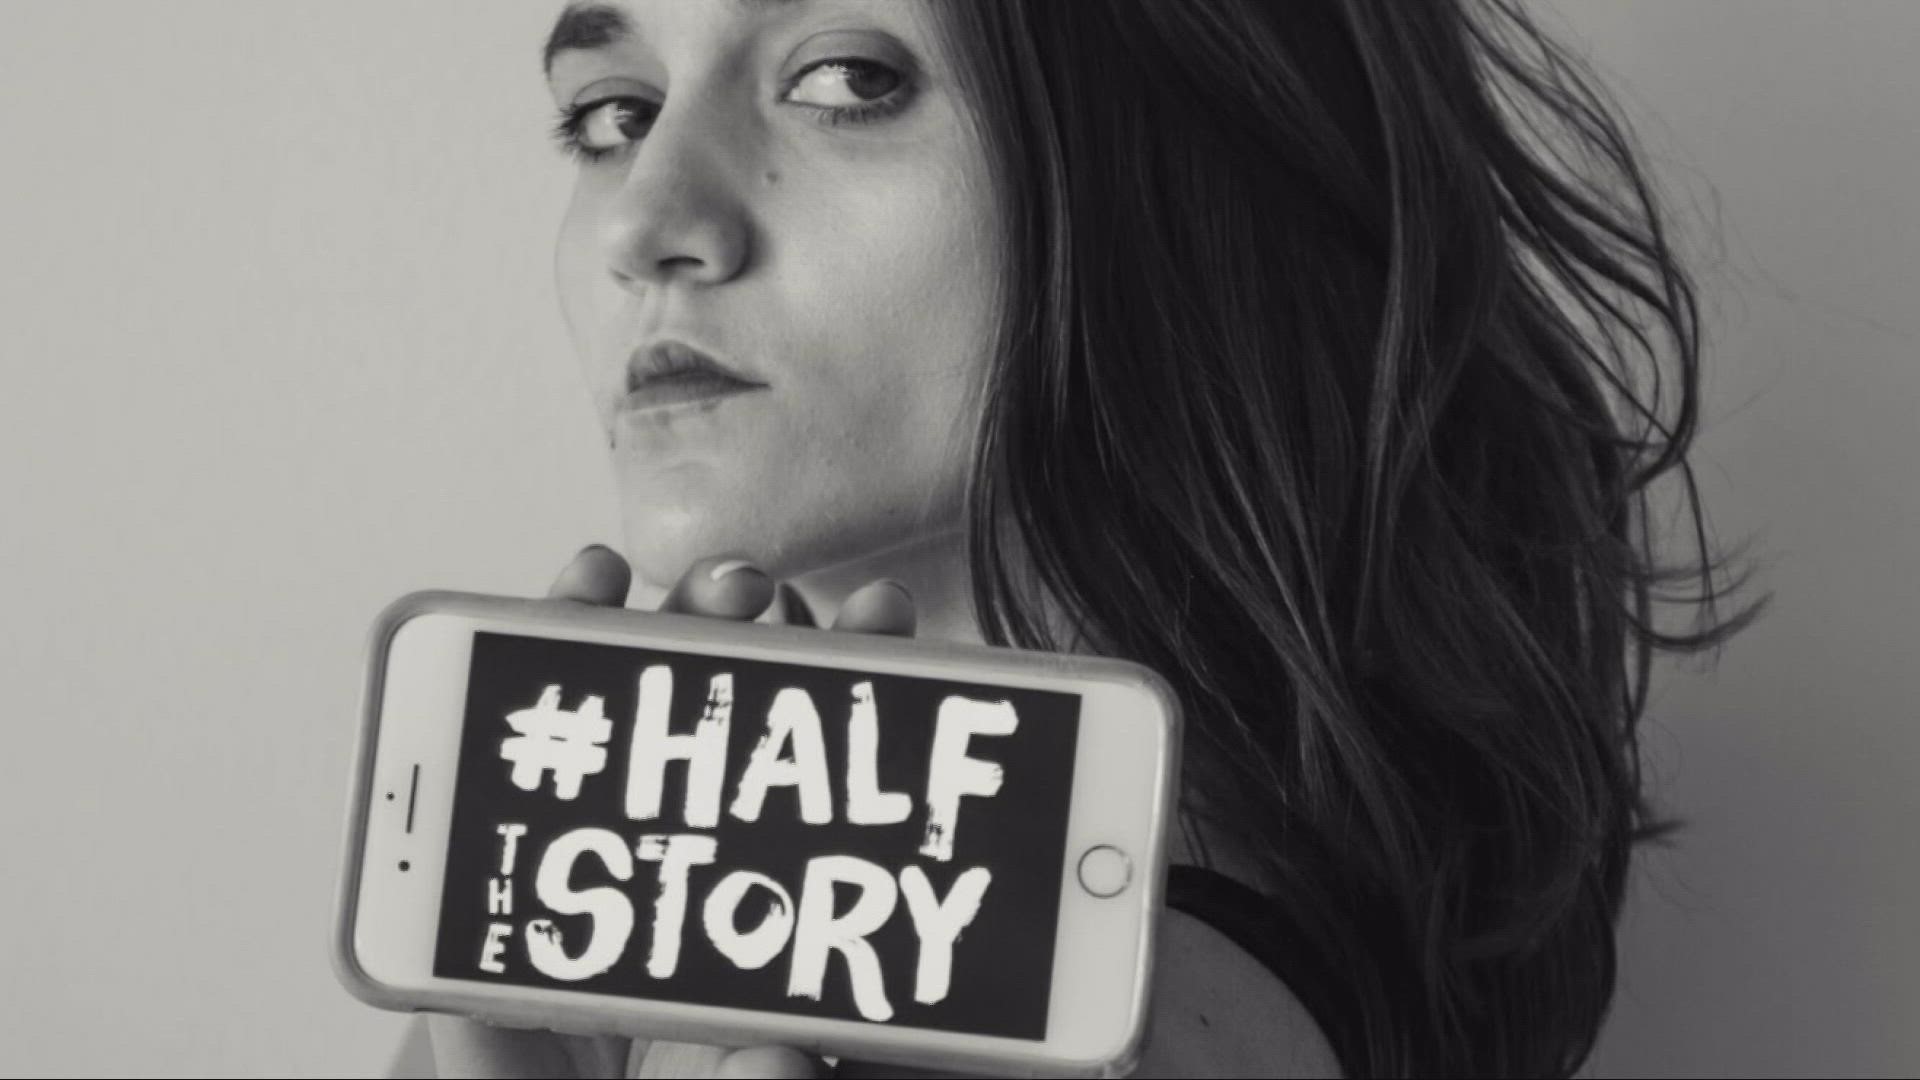 After facing technology addiction, Larissa May said she founded #HalfTheStory Life Unfilered as non-profit to empower kids and teens relationship with social media.